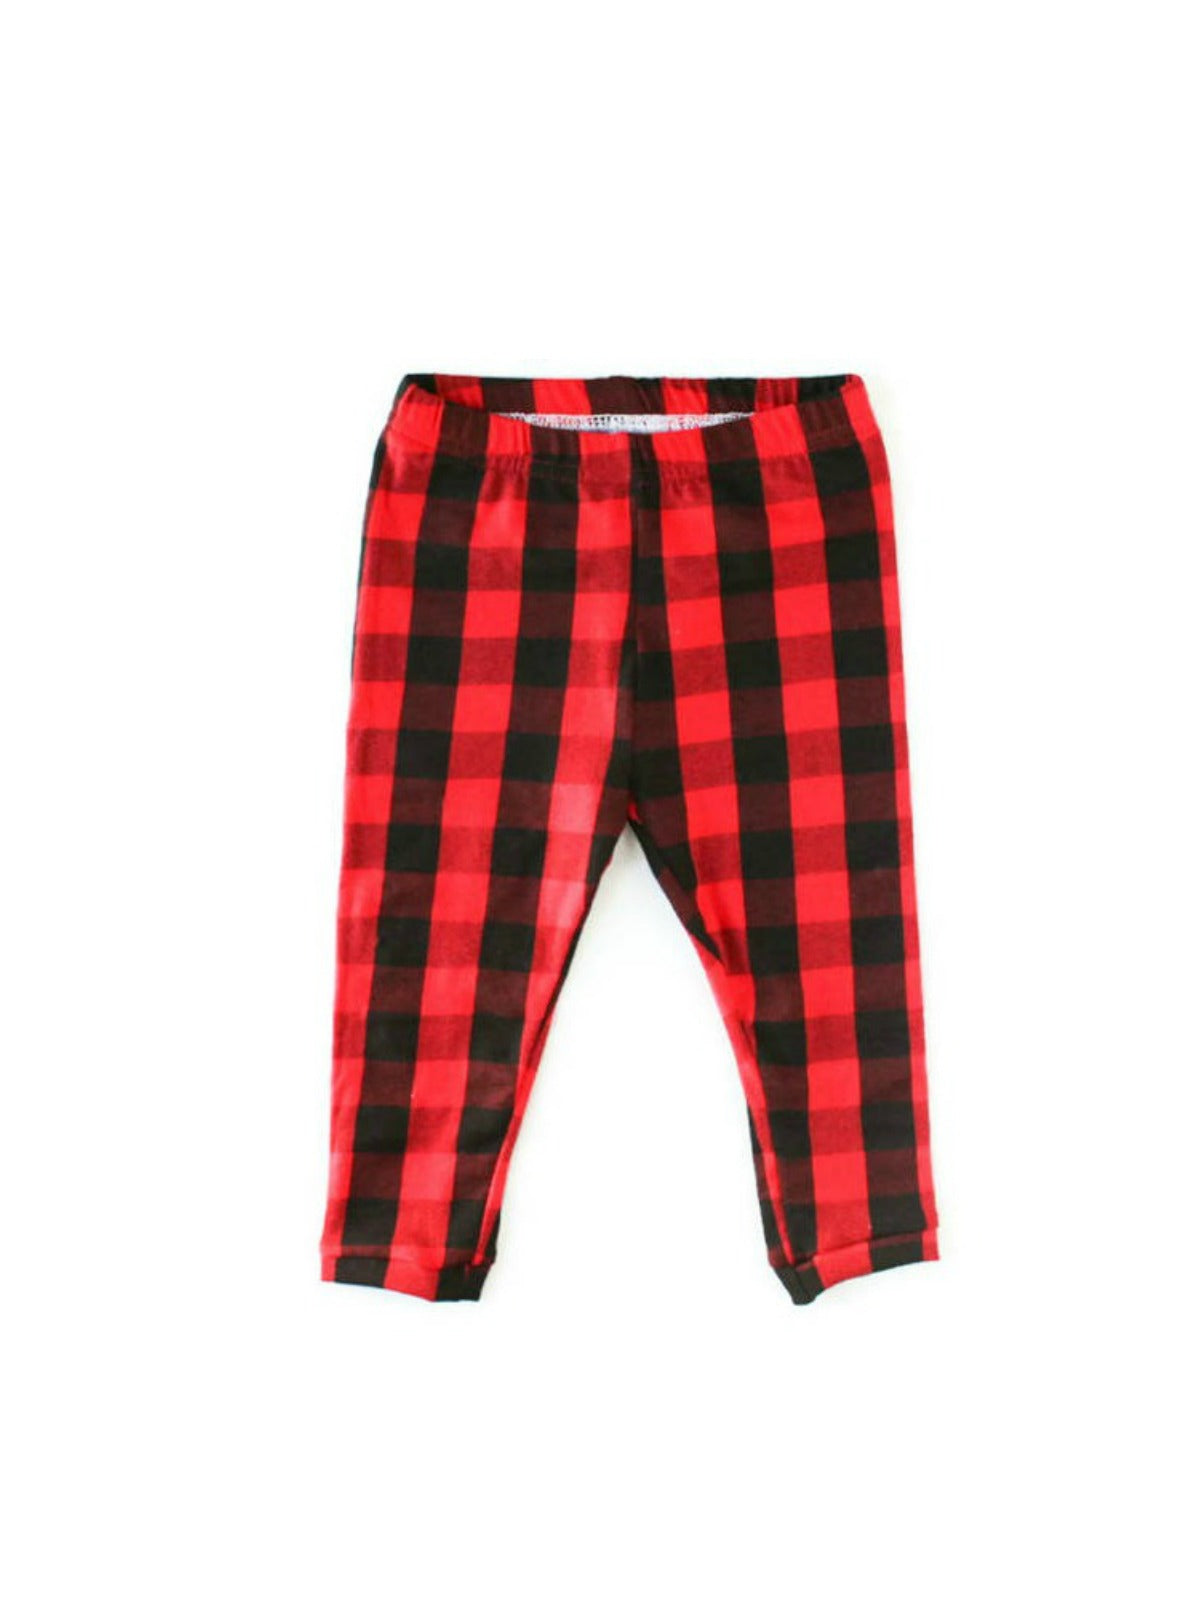 Christmas Red And Black Plaid Yoga Pants For Women High Waist Leggings with  Pockets For Gym Workout Tights : Amazon.co.uk: Fashion